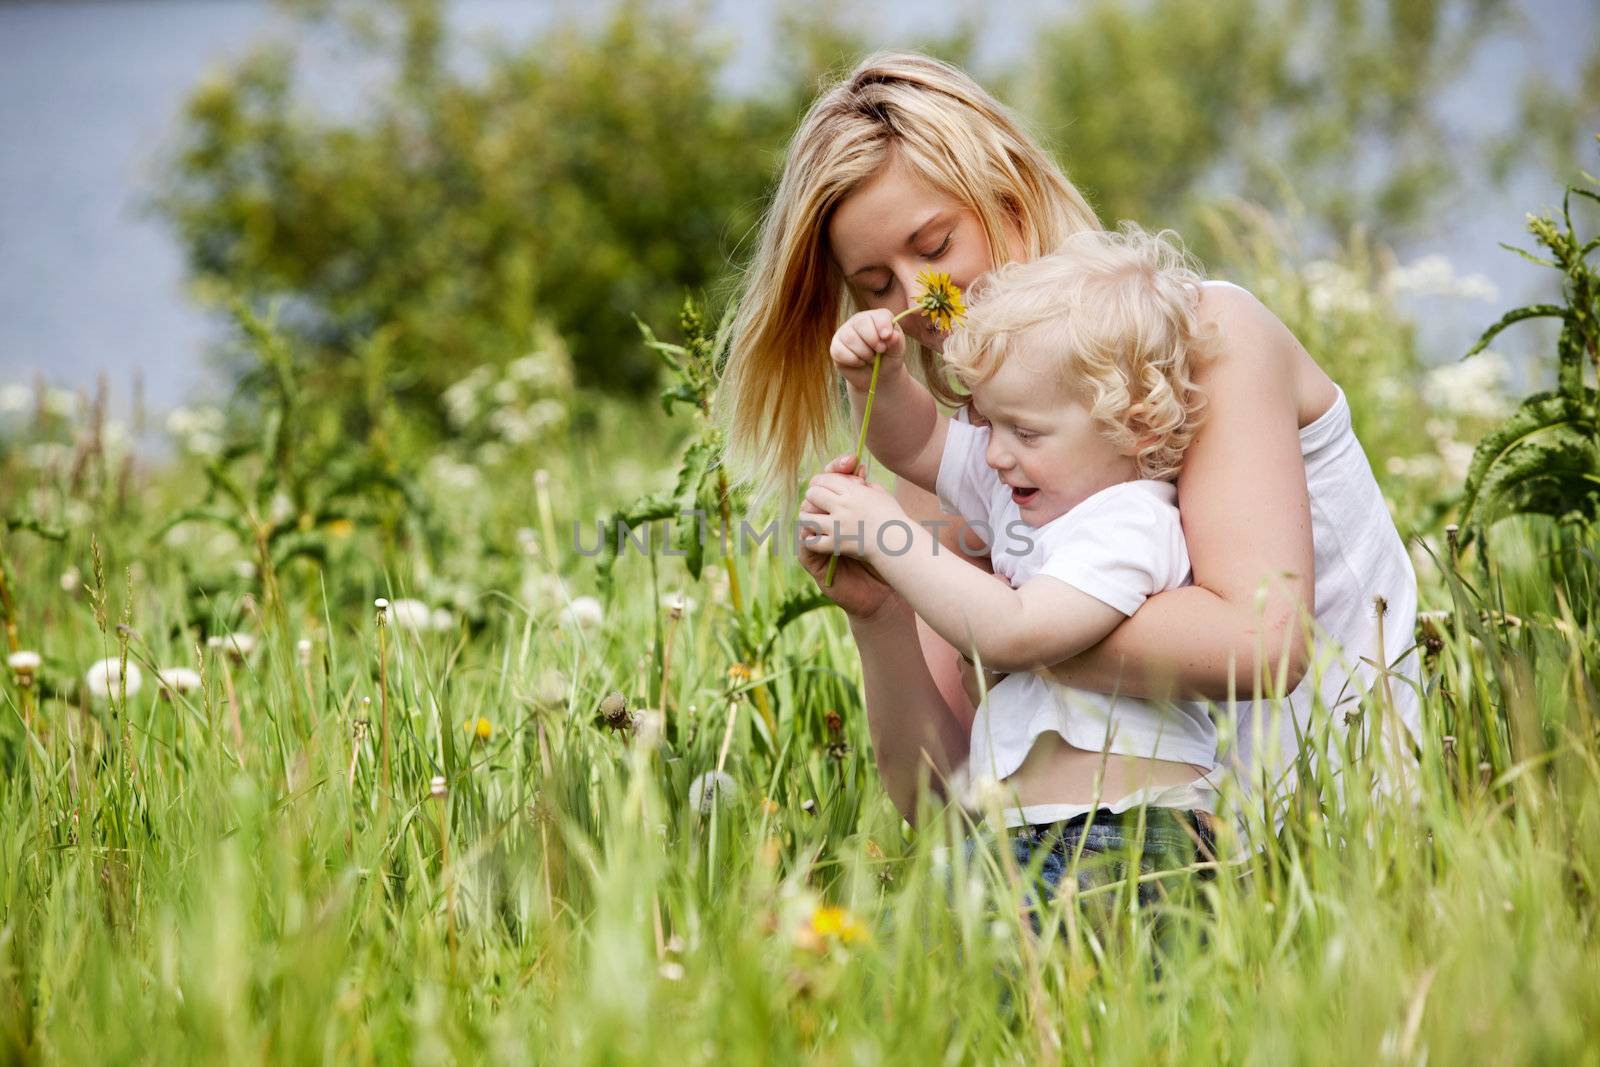 Mother and Son in Grass Field by leaf